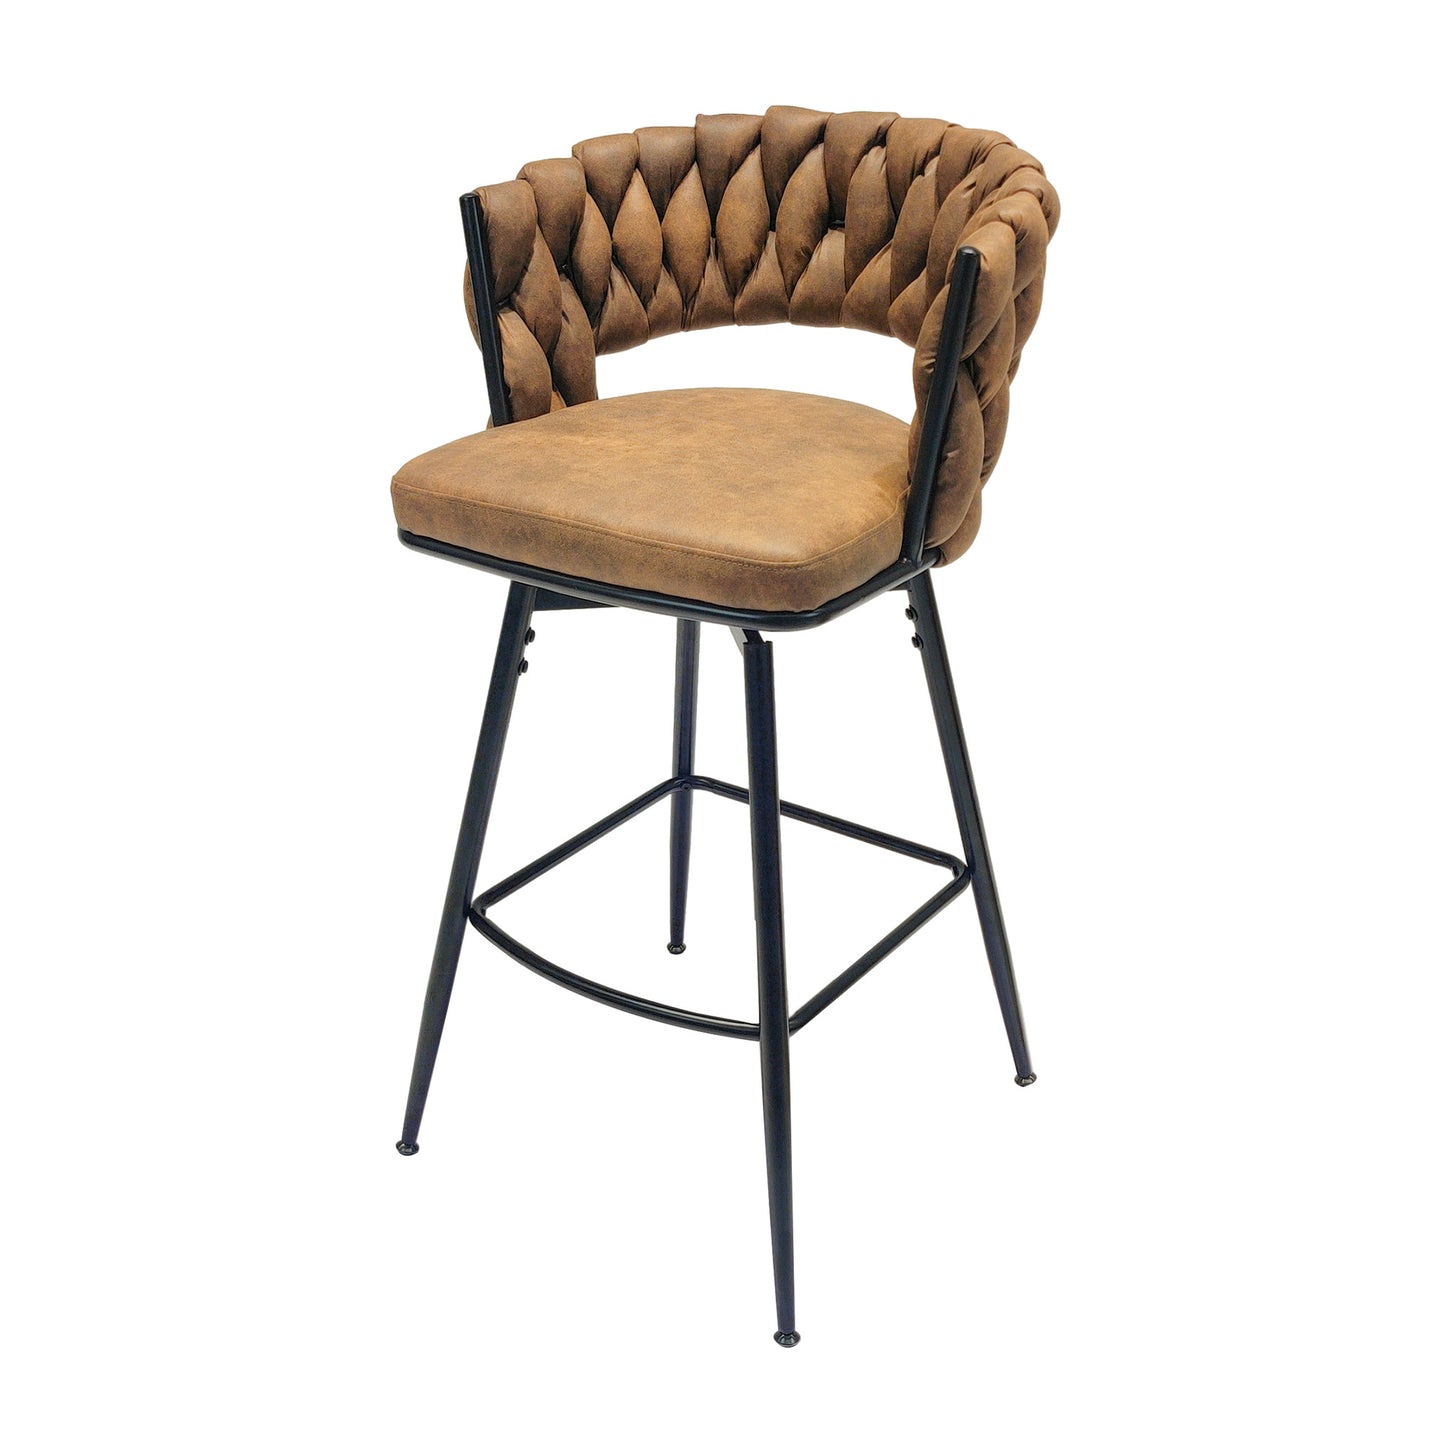 technical leather woven bar stool set of 4, brown